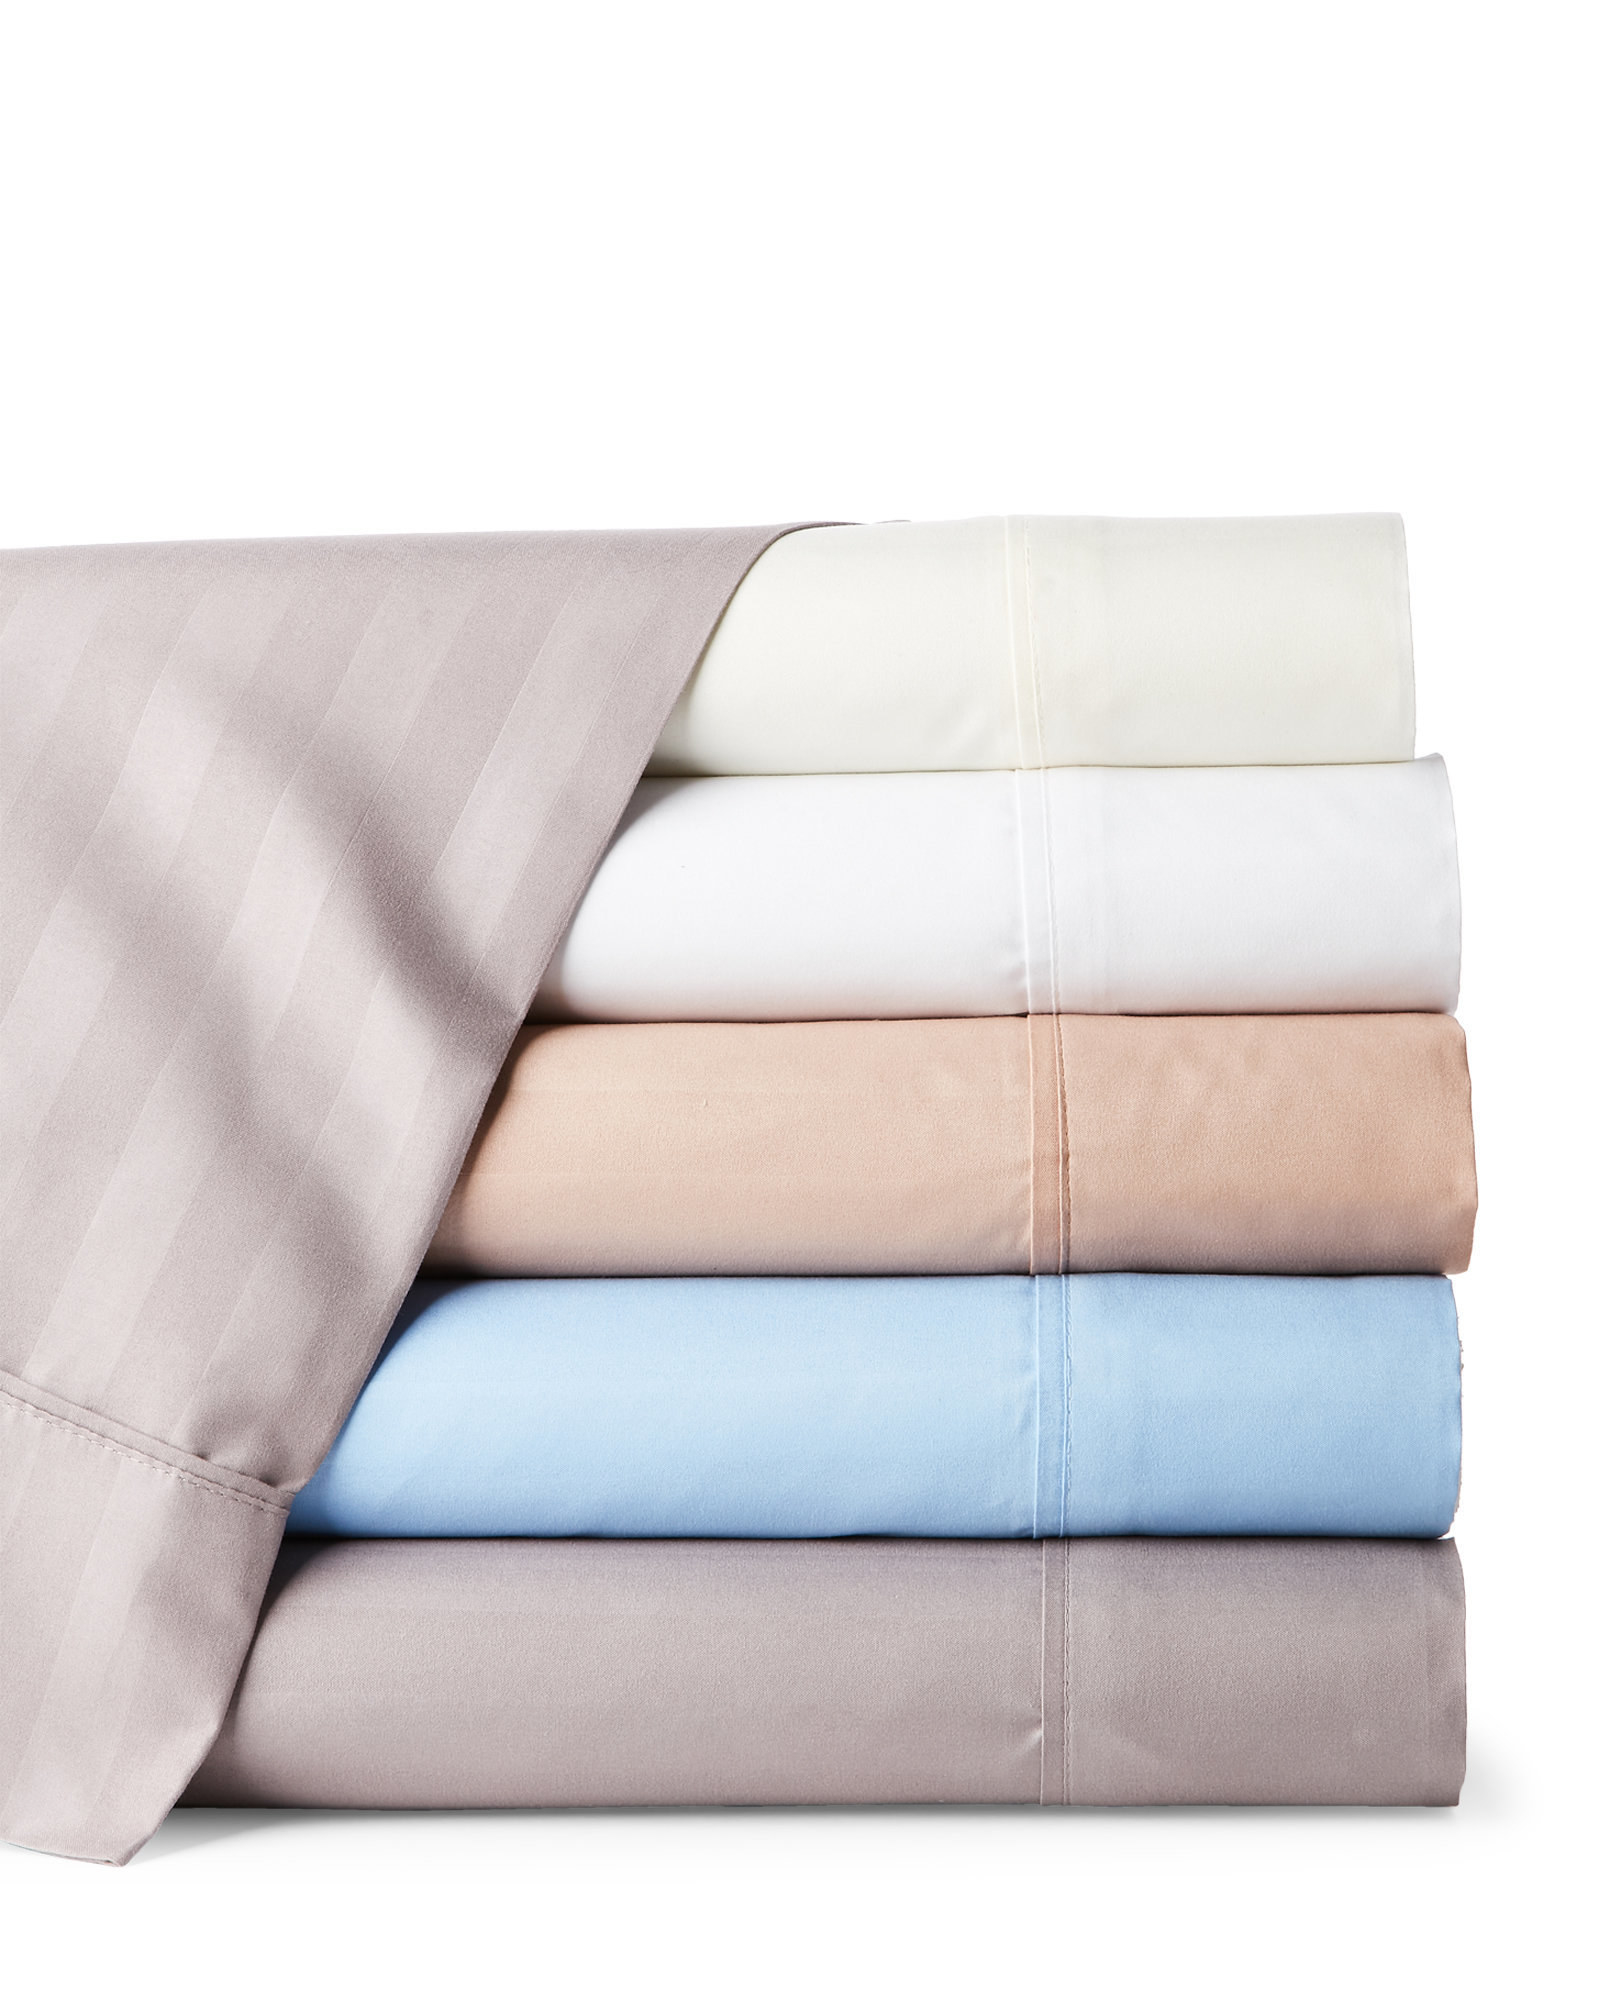 22 Of The Best Places To Buy Bedding Online